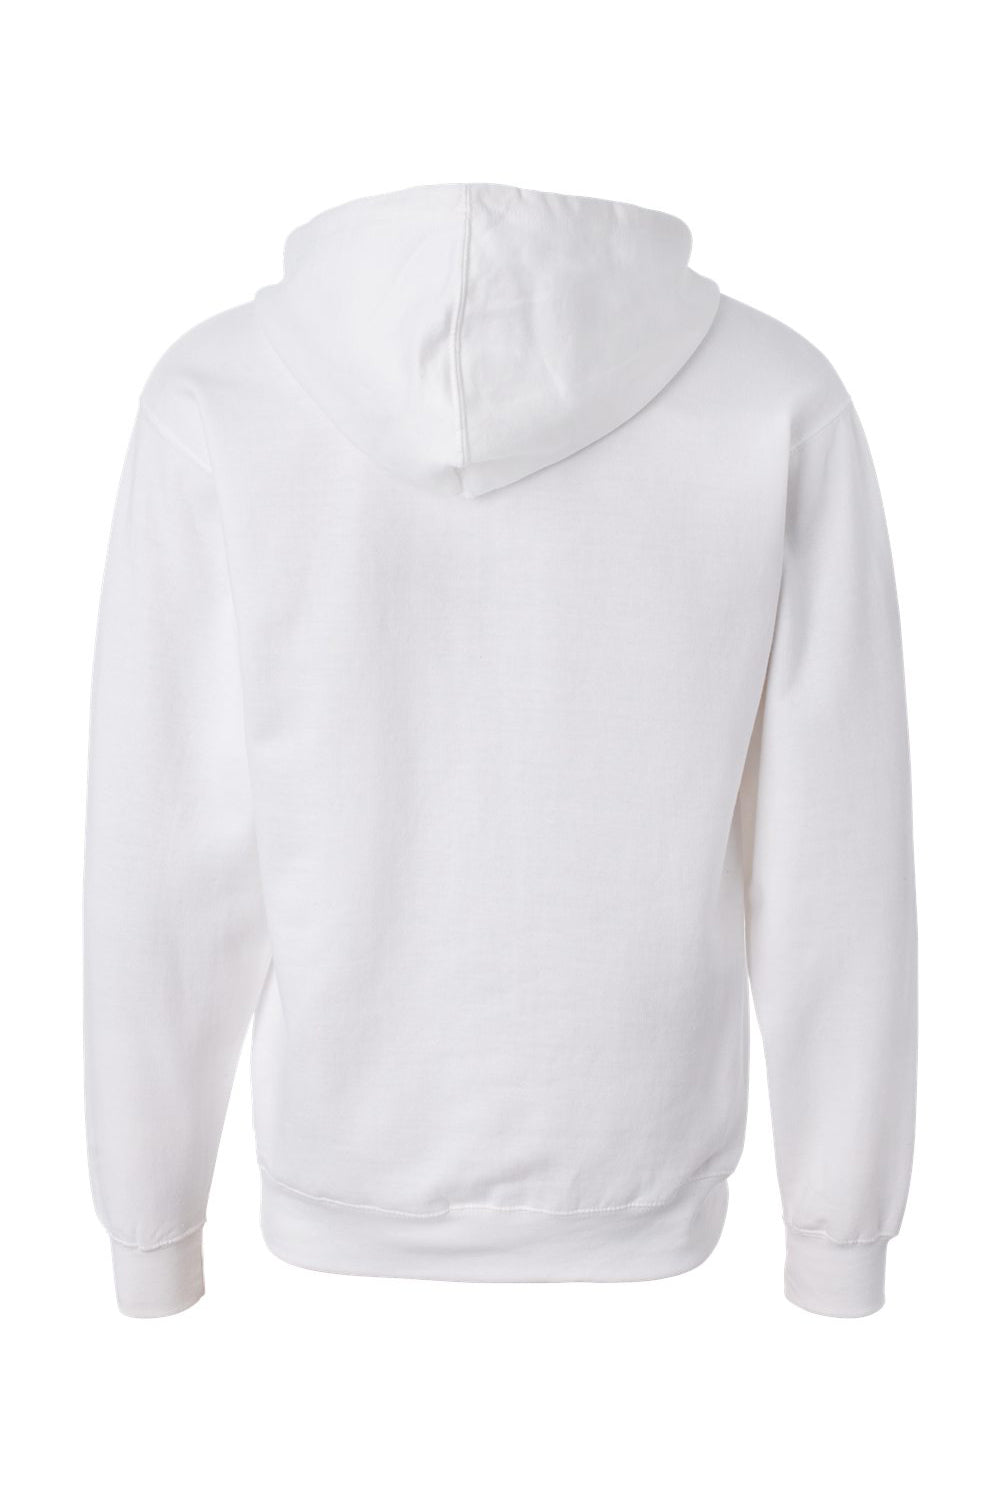 Independent Trading Co. SS4500Z Mens Full Zip Hooded Sweatshirt Hoodie White Flat Back